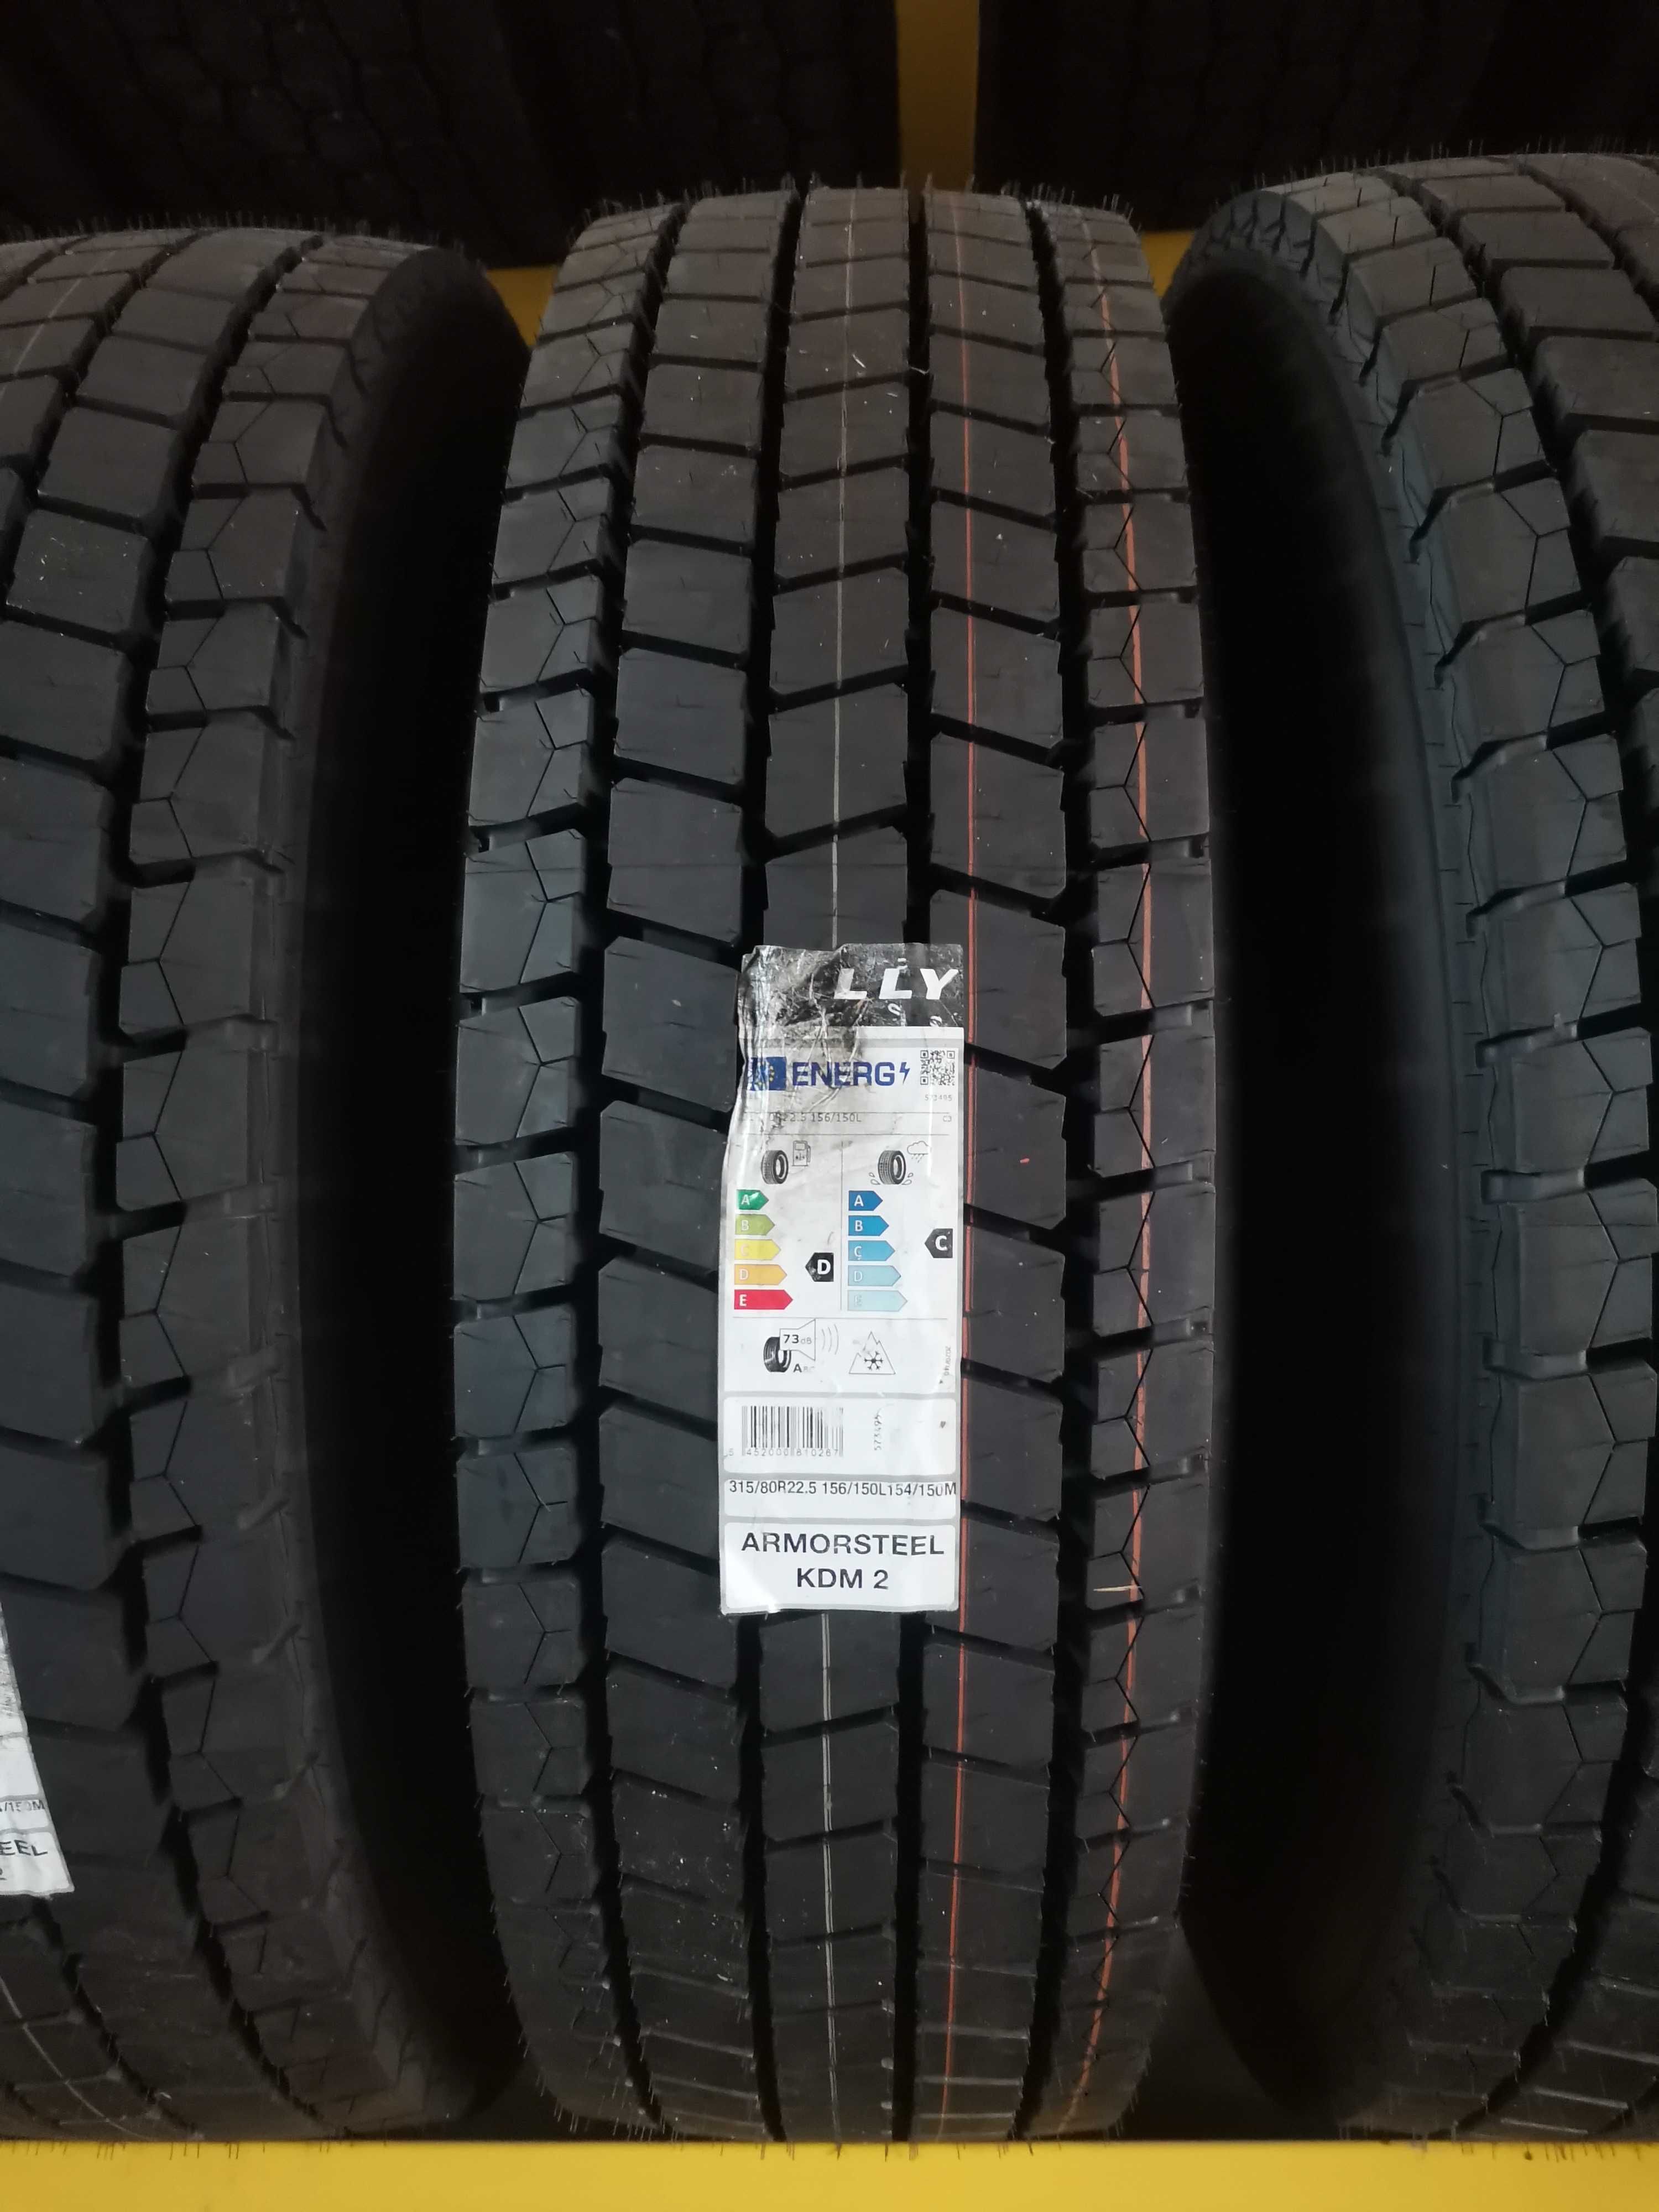 Anvelope camion noi Kelly 315/80R22,5 si 13R22,5